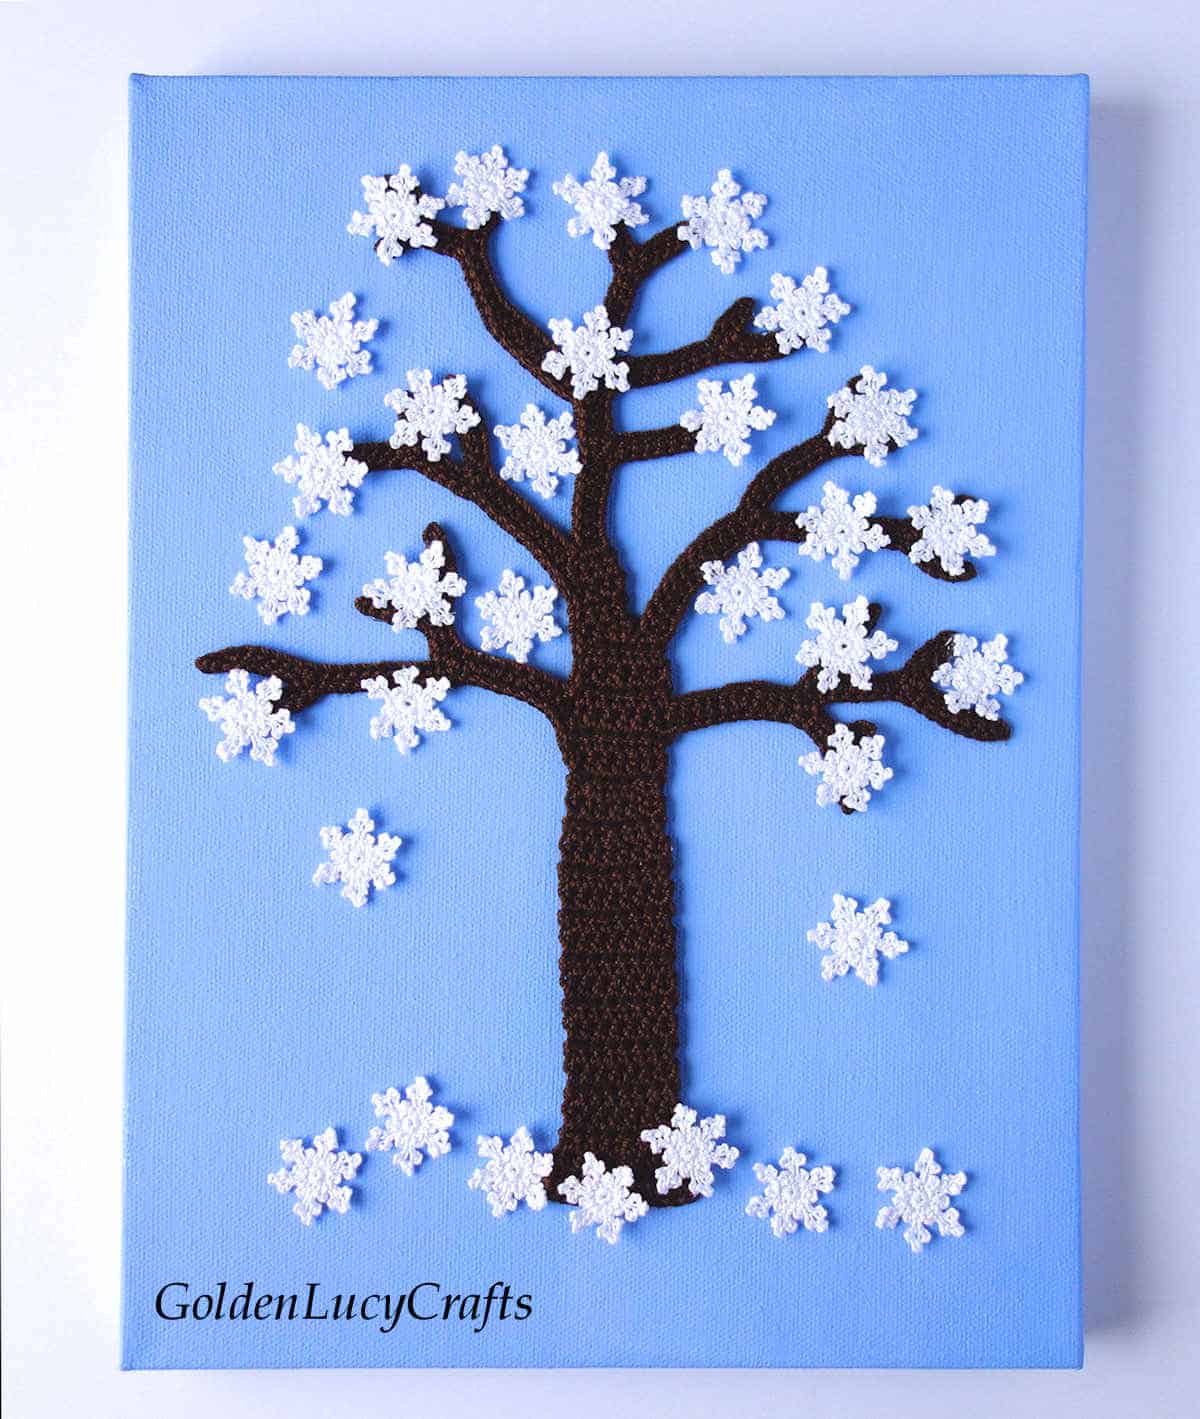 Crocheted tree and small snowflakes on the blue background, wall art.